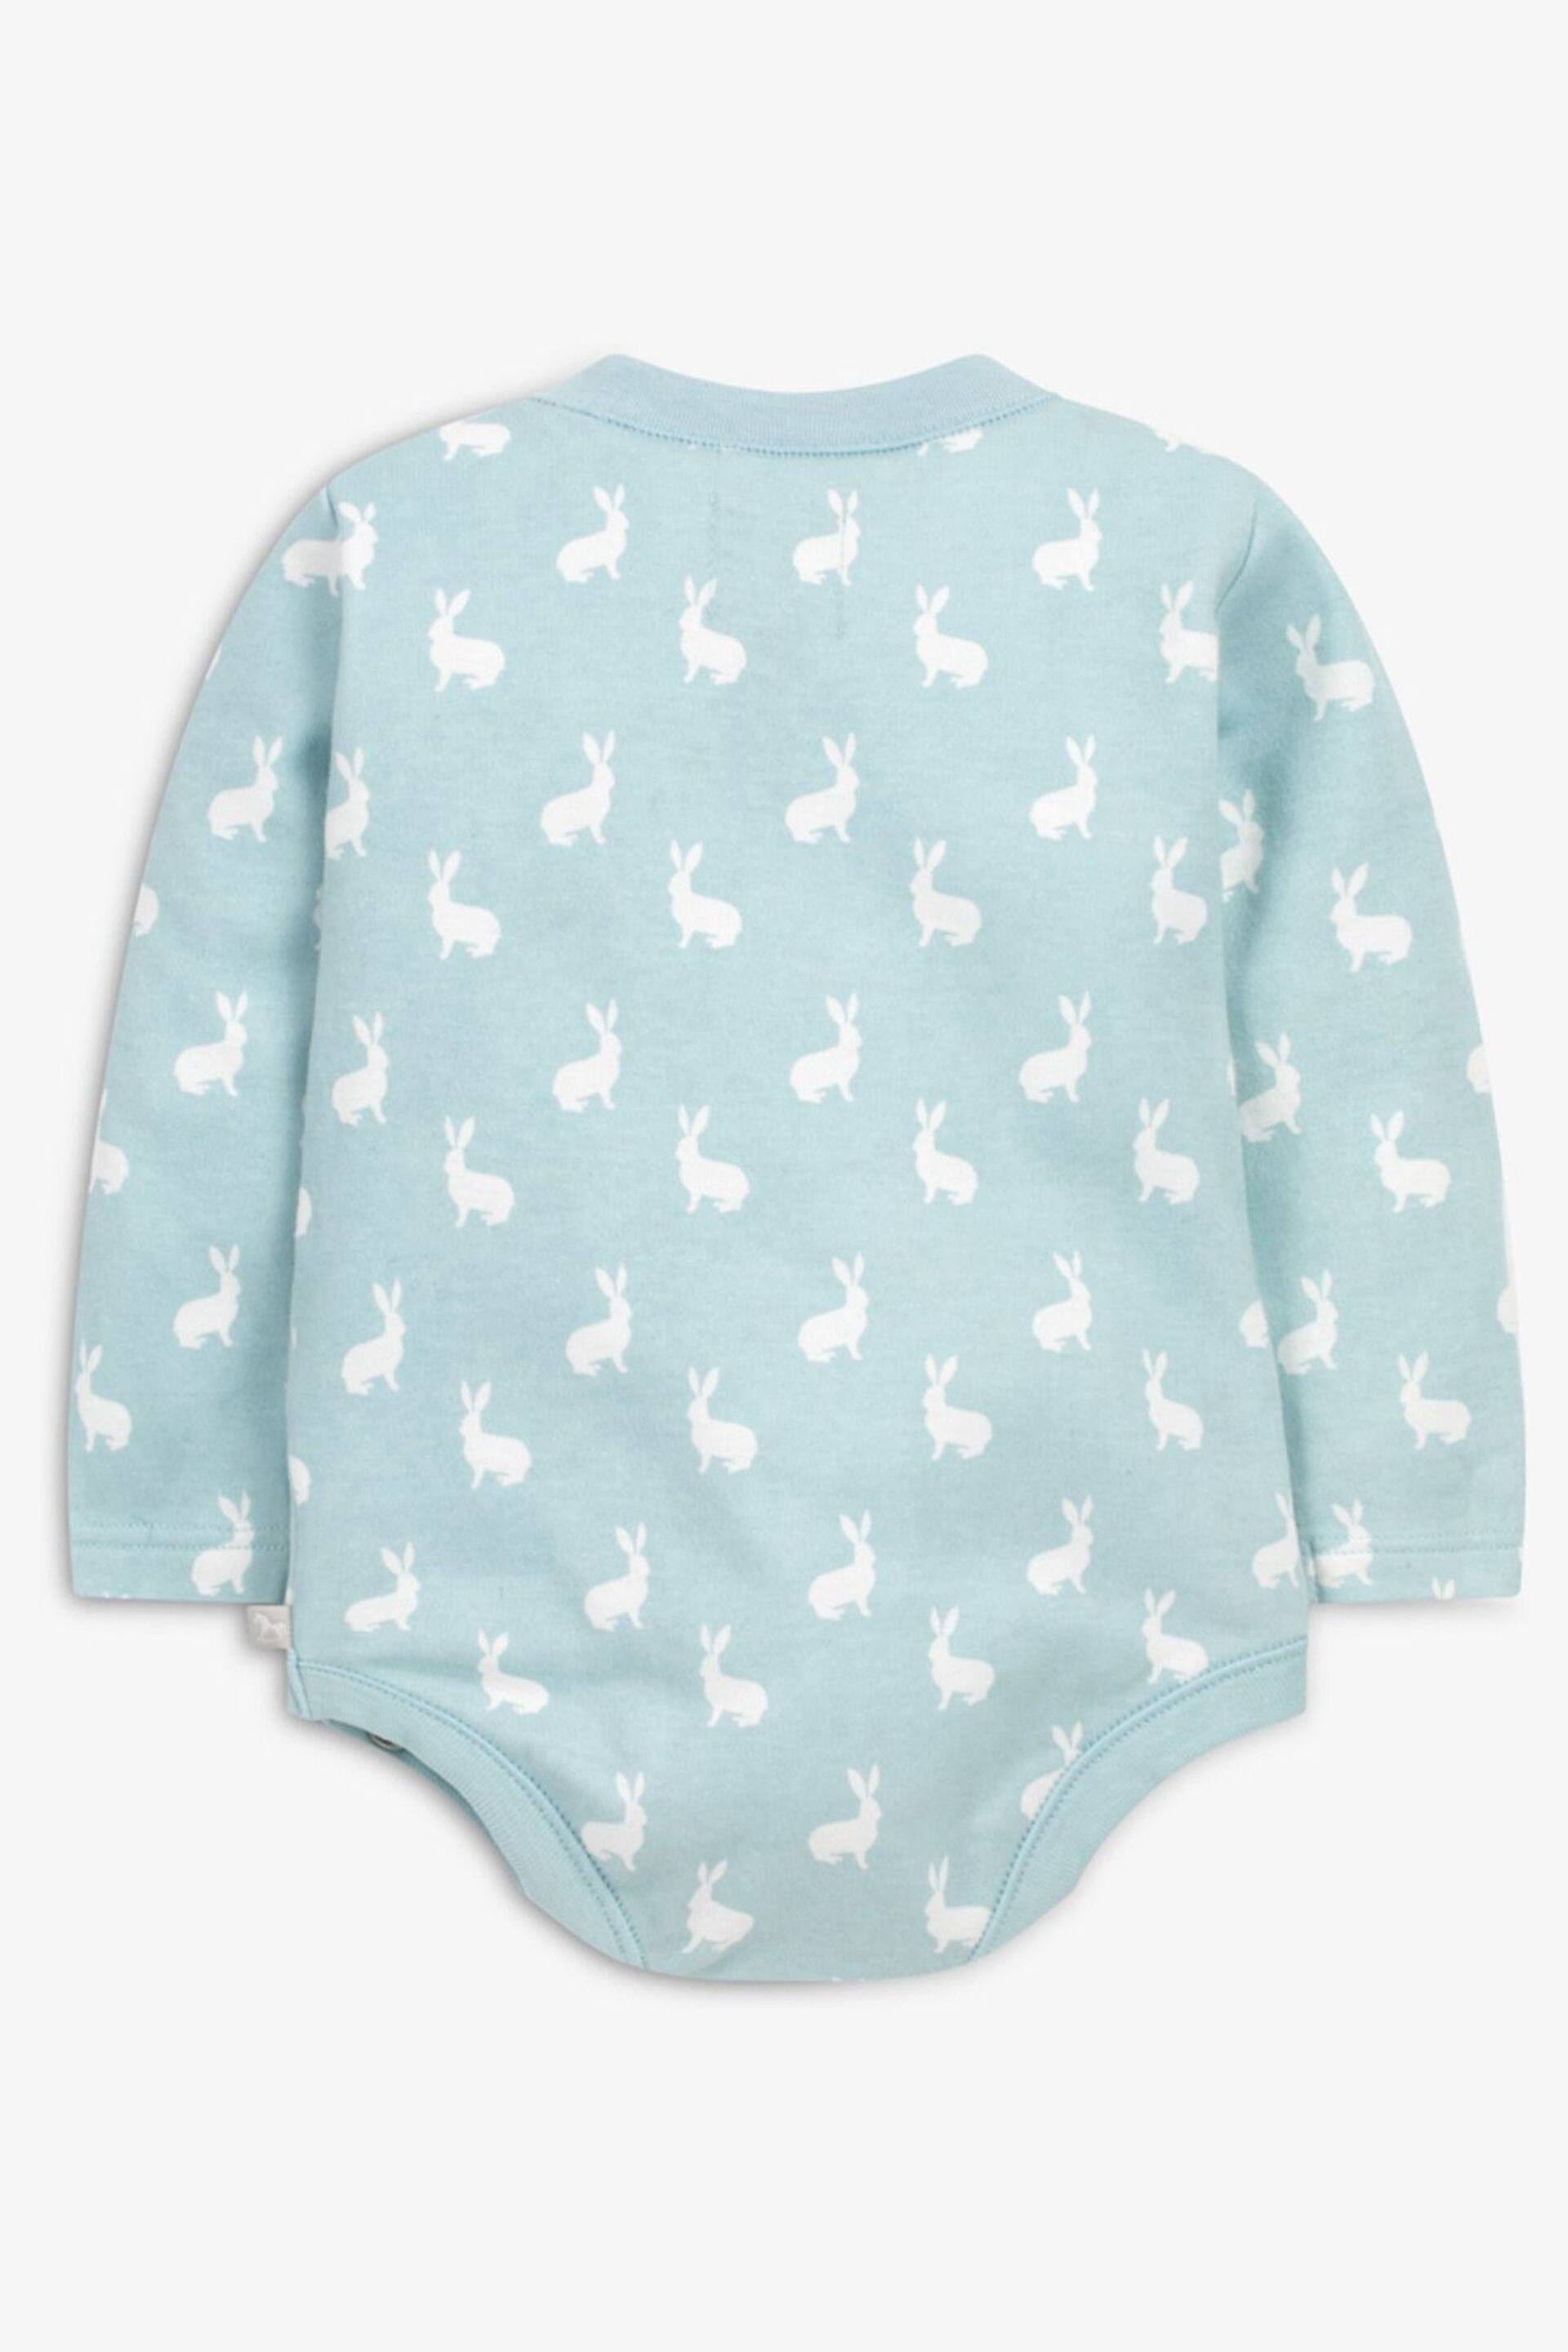 The Little Tailor Baby Easter Bunny Print Soft Cotton Bodysuit - Image 2 of 4